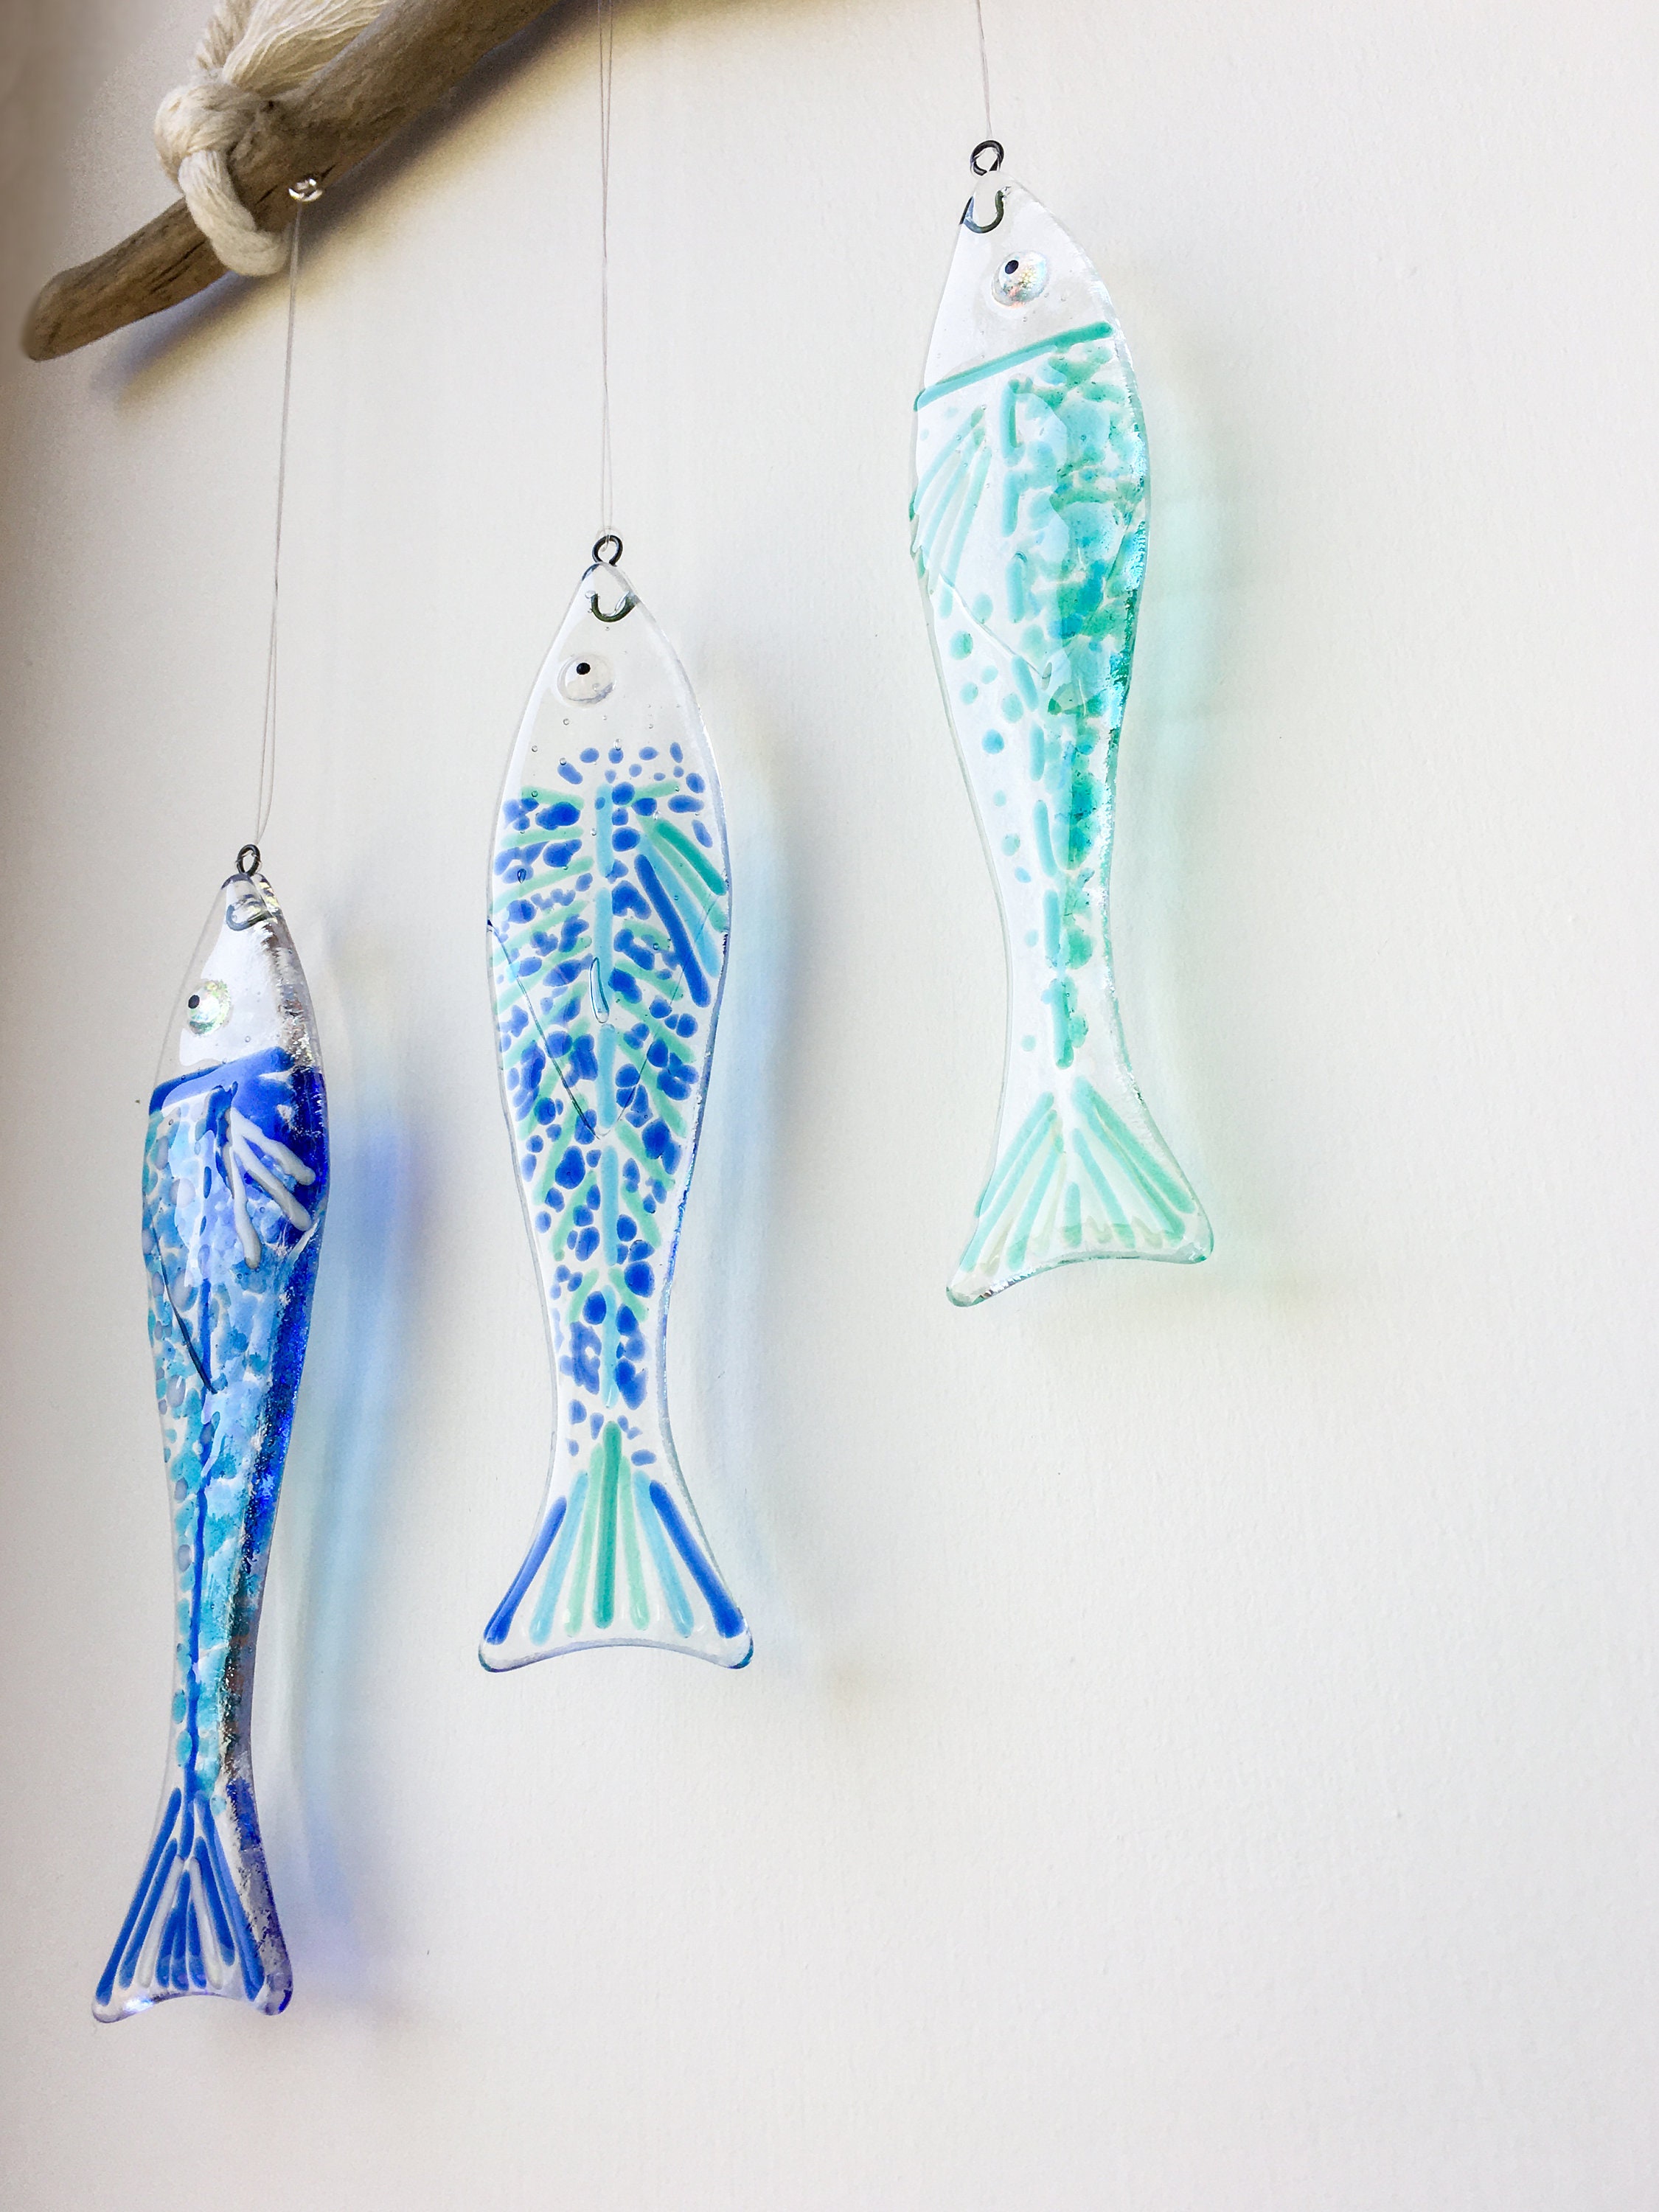 DIY Fused Glass Art Craft Kit Hanging Lagoon Fish Sun Catcher by Natalie  Bullock Art Return Stamps Included -  Hong Kong